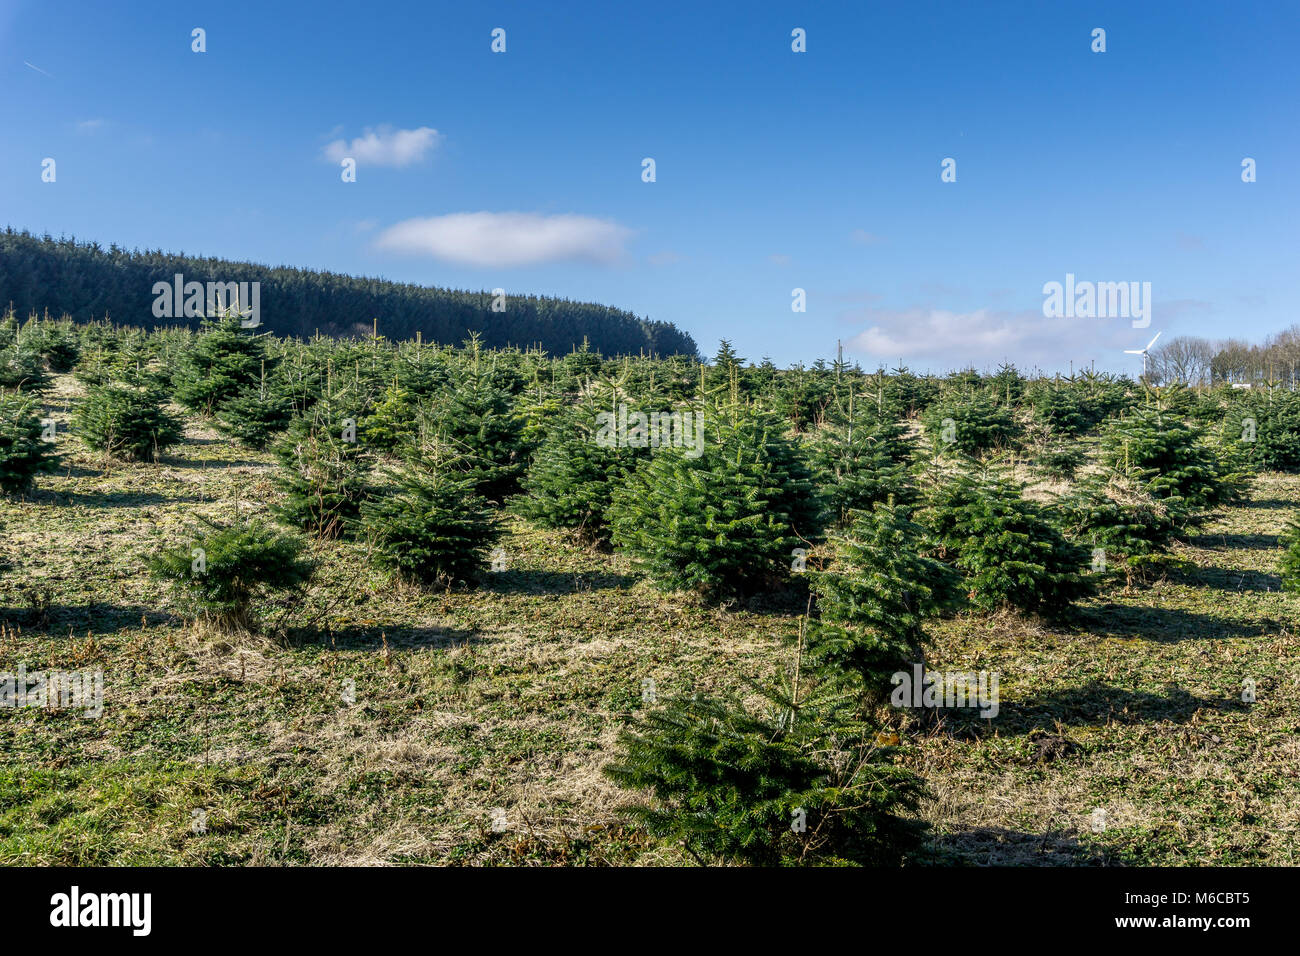 Young pine trees being grown by the forrestry commission near Holme Styes Reservoir, Holmfirth, West Yorkshire. Stock Photo